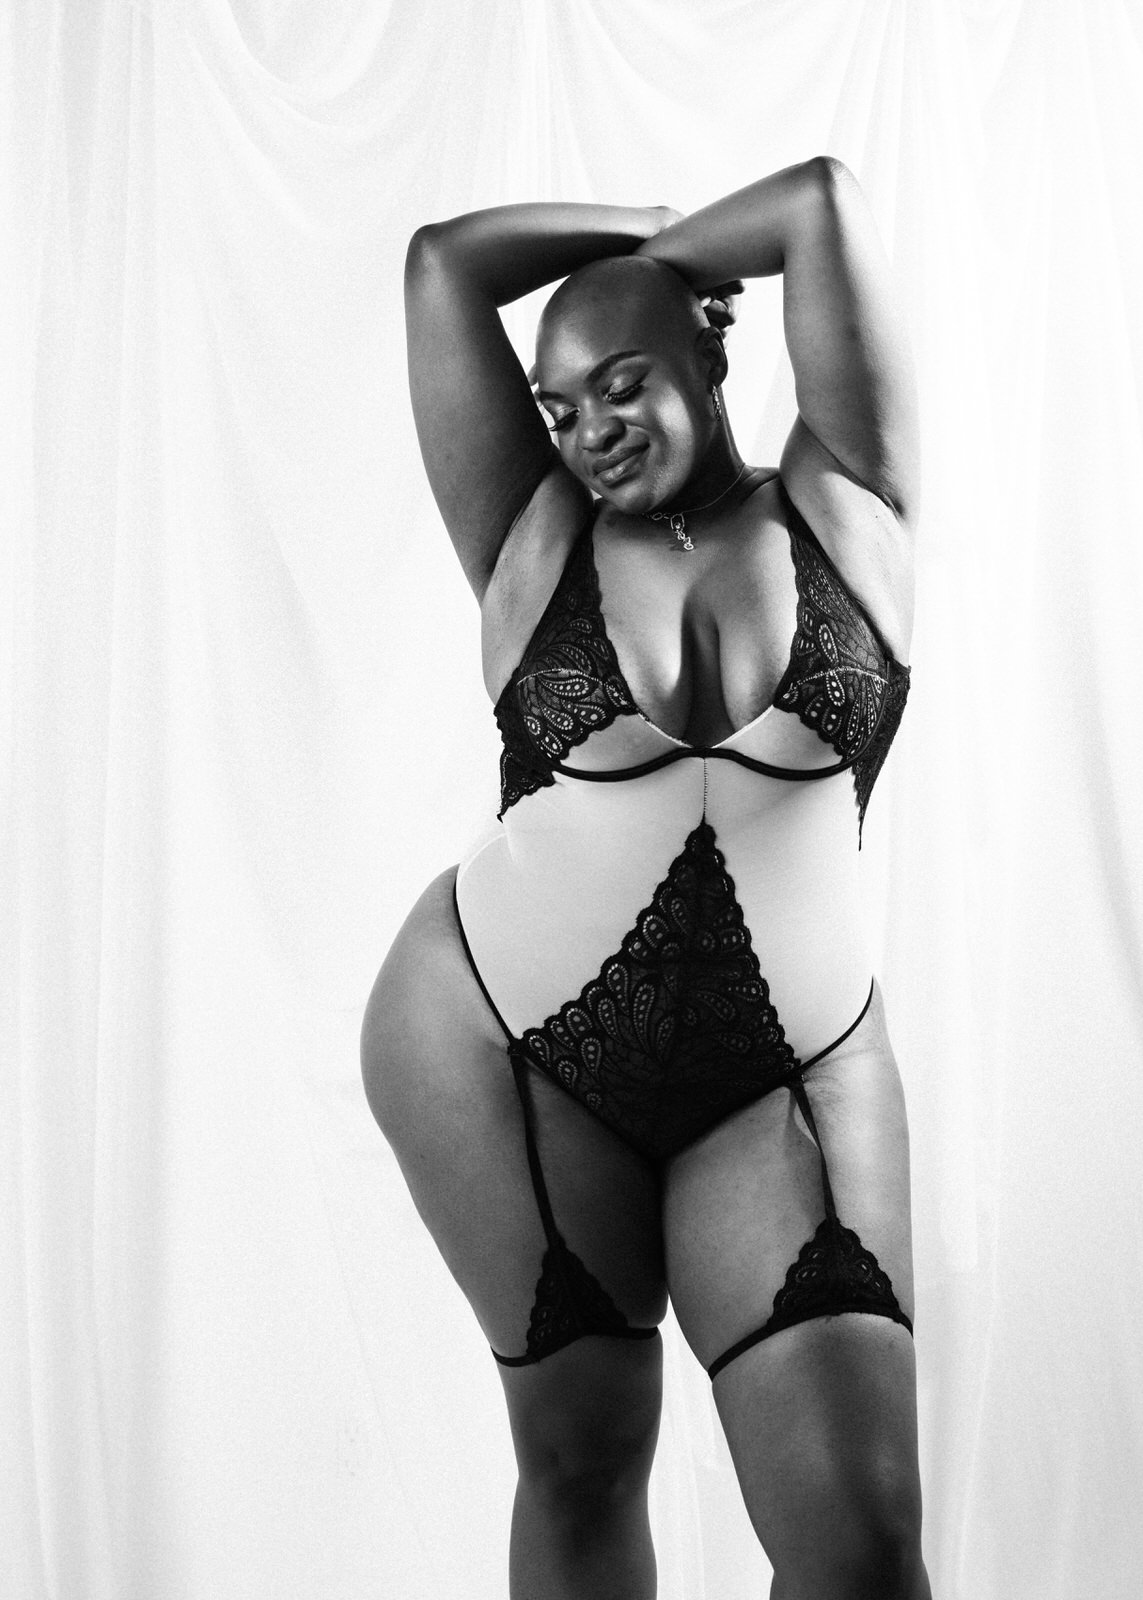 vancouver boudoir photographer image of plus size black woman with alopecia wearing lingerie and standing with hands up behind head